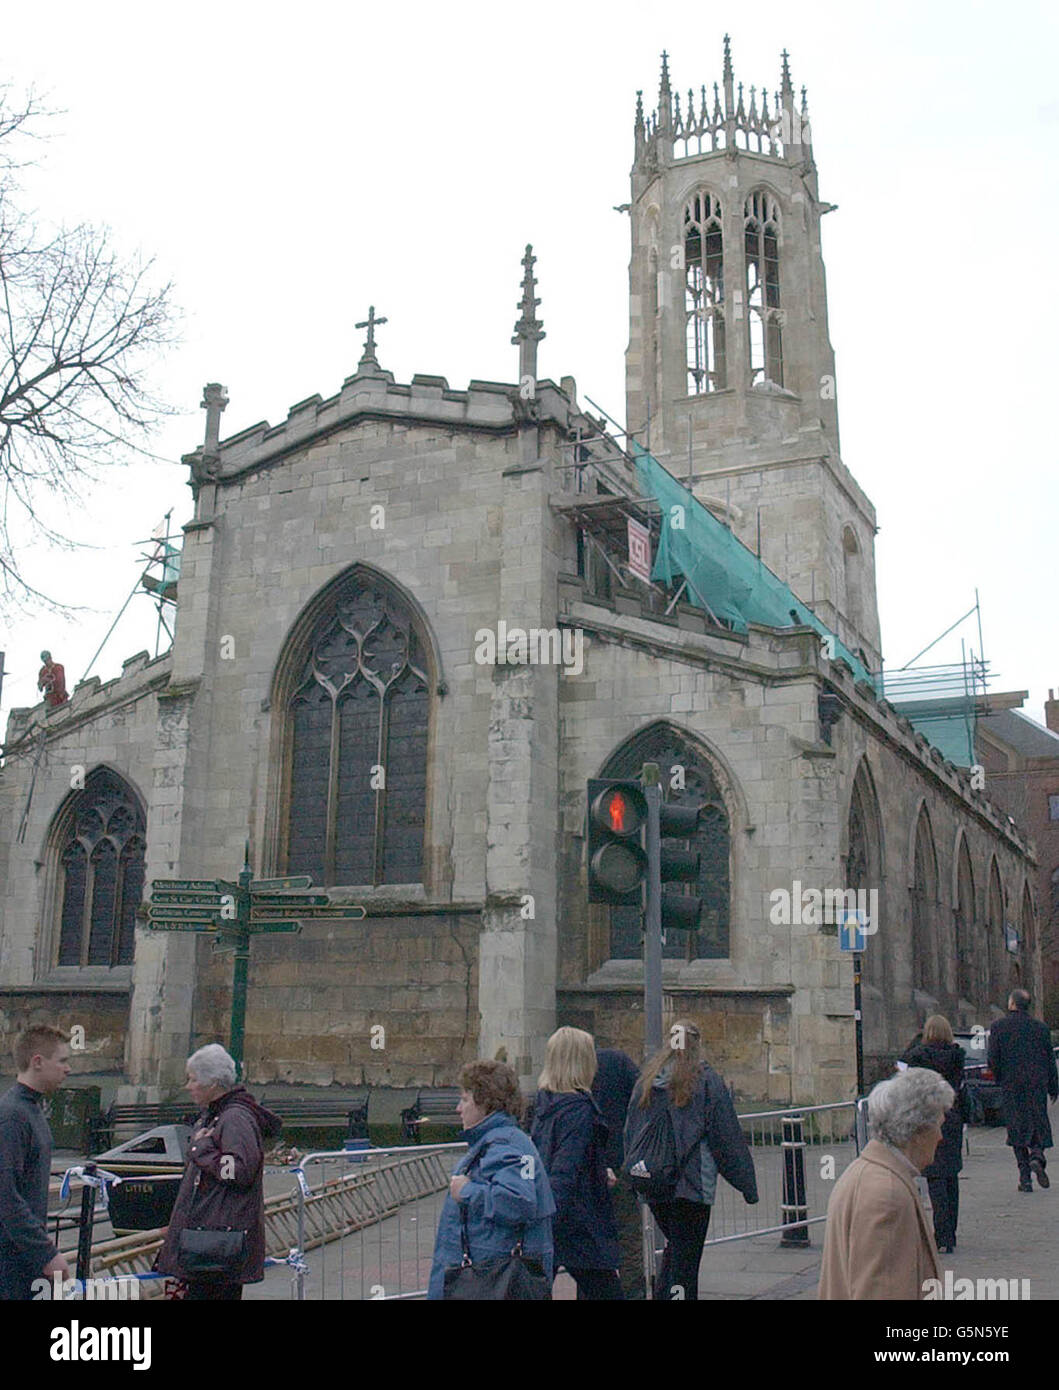 All Saints Church in York with the missing pinnacle (L), after a piece of masonry fell from the roof during gale force winds in the city last night, killing a woman who was walking undernearth. Stock Photo